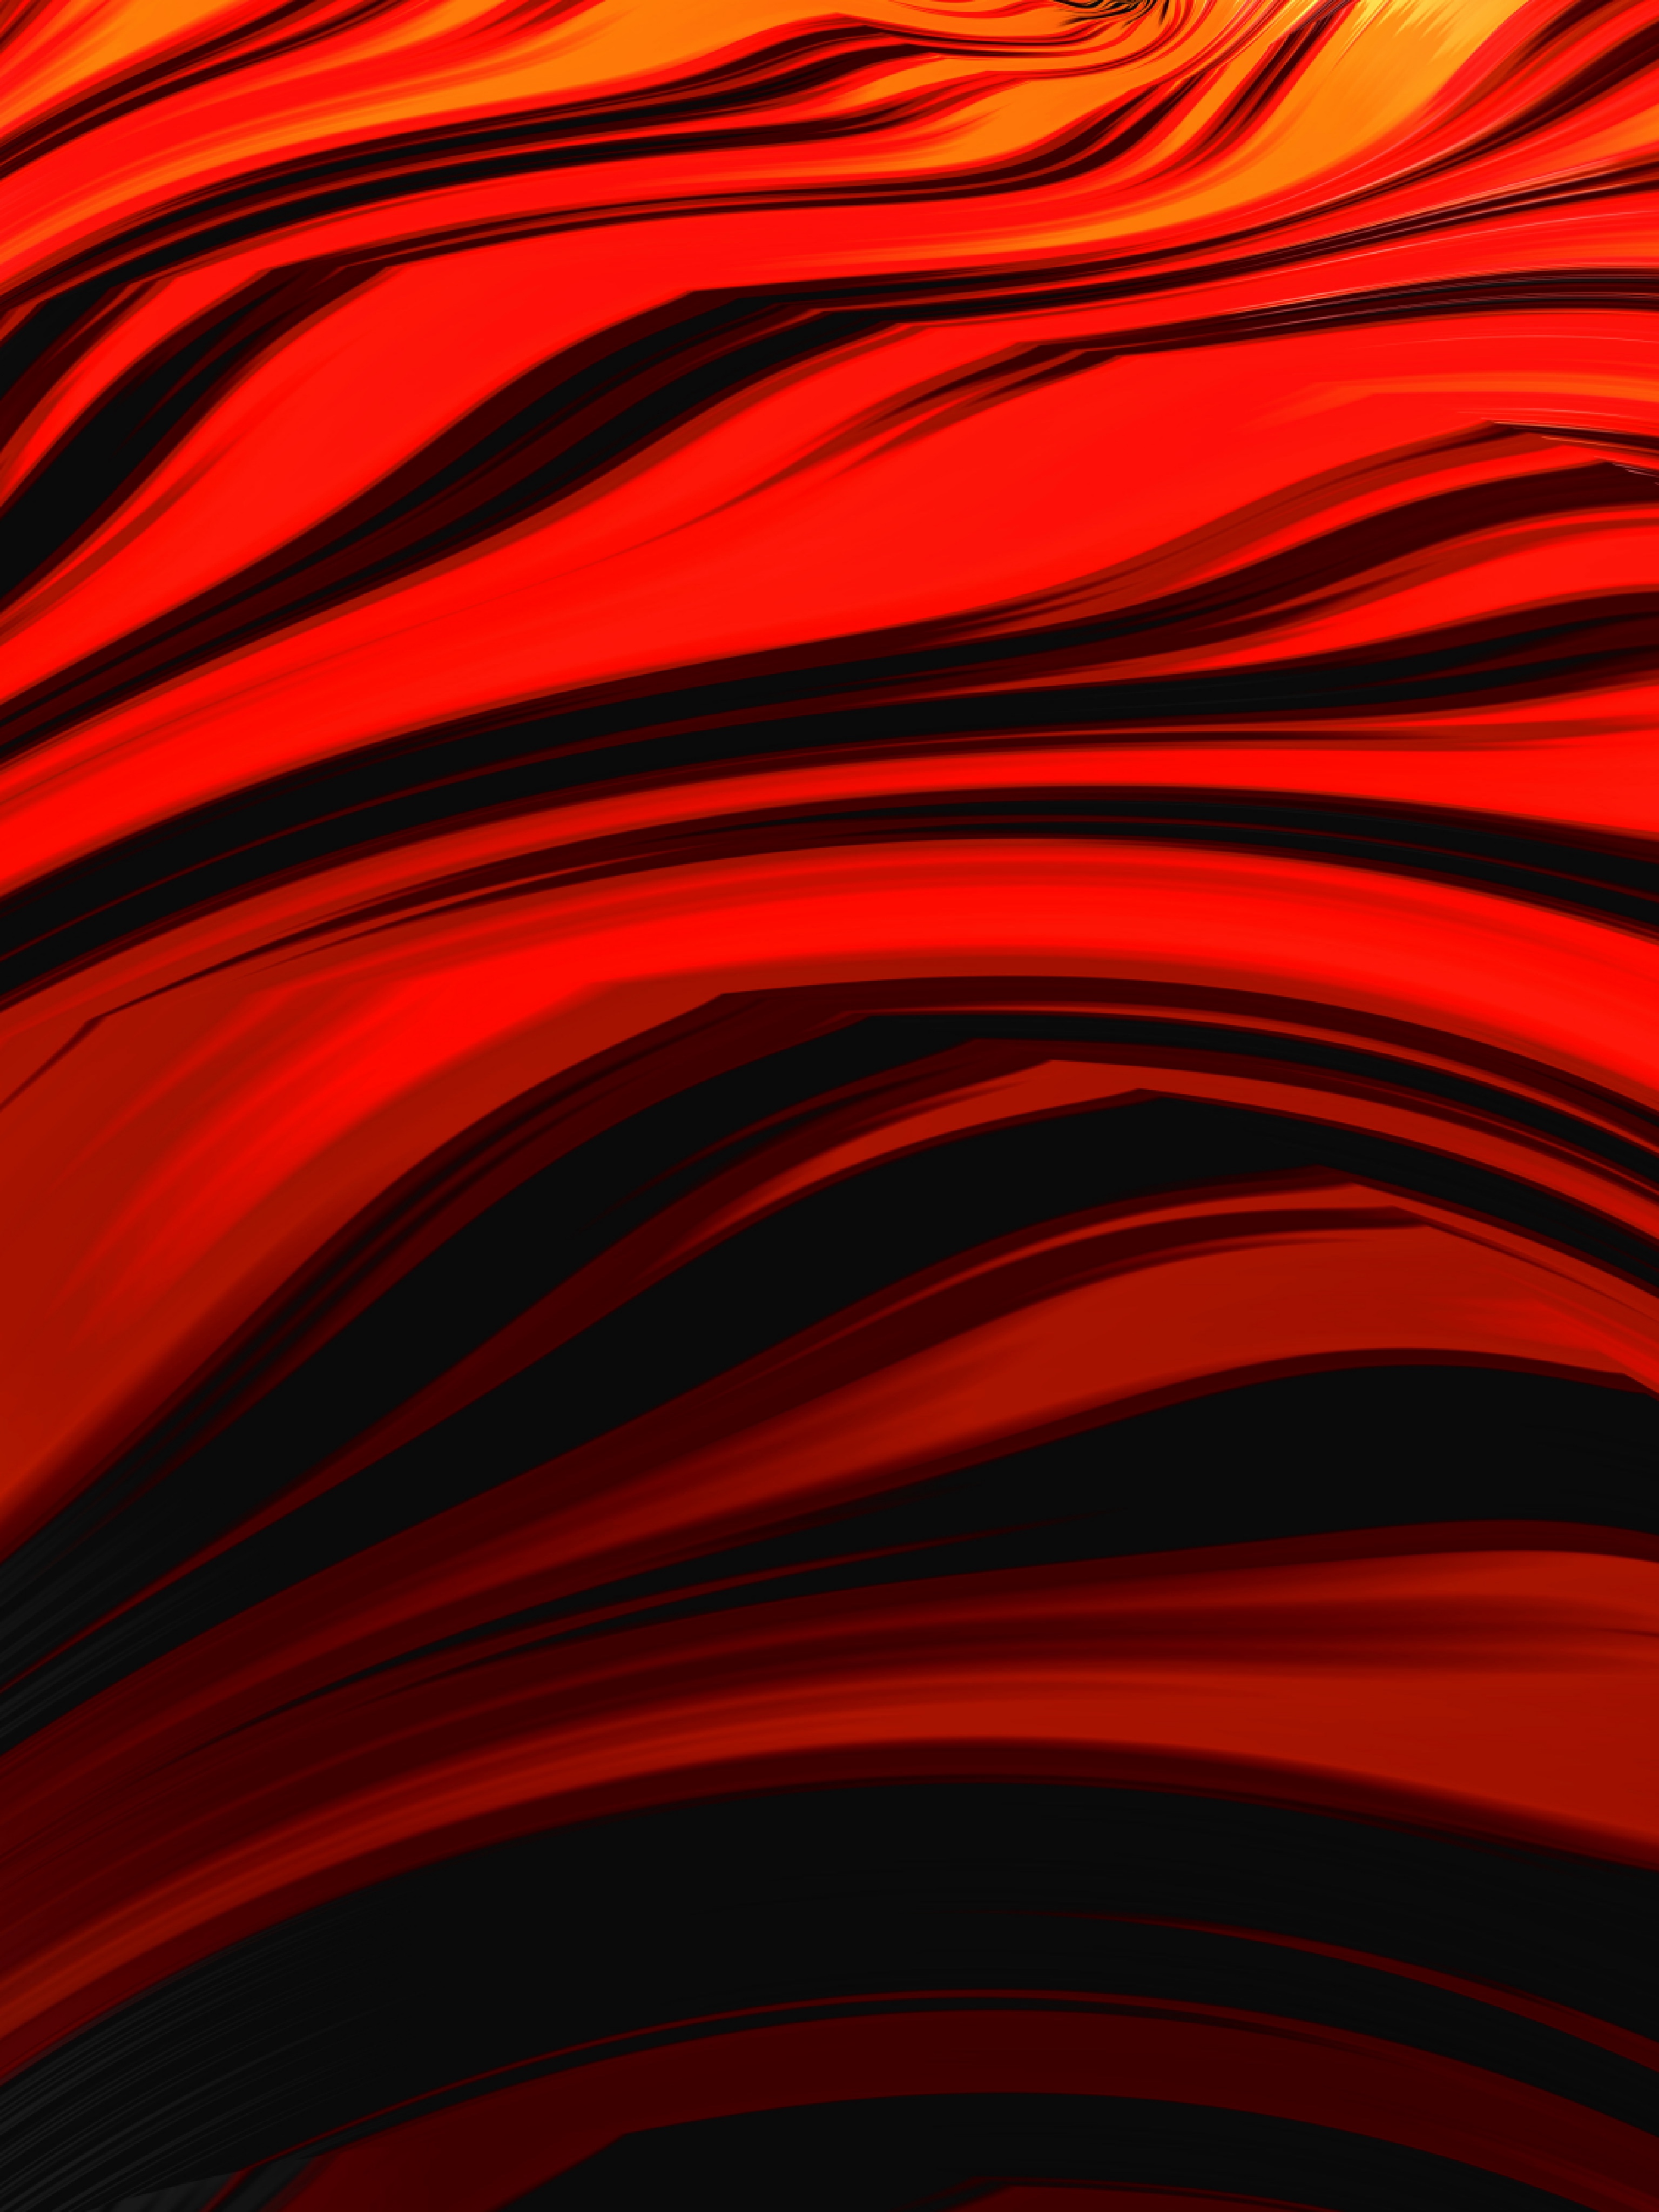 red, texture, abstract, bright, wavy, shadows, saturated, invoice